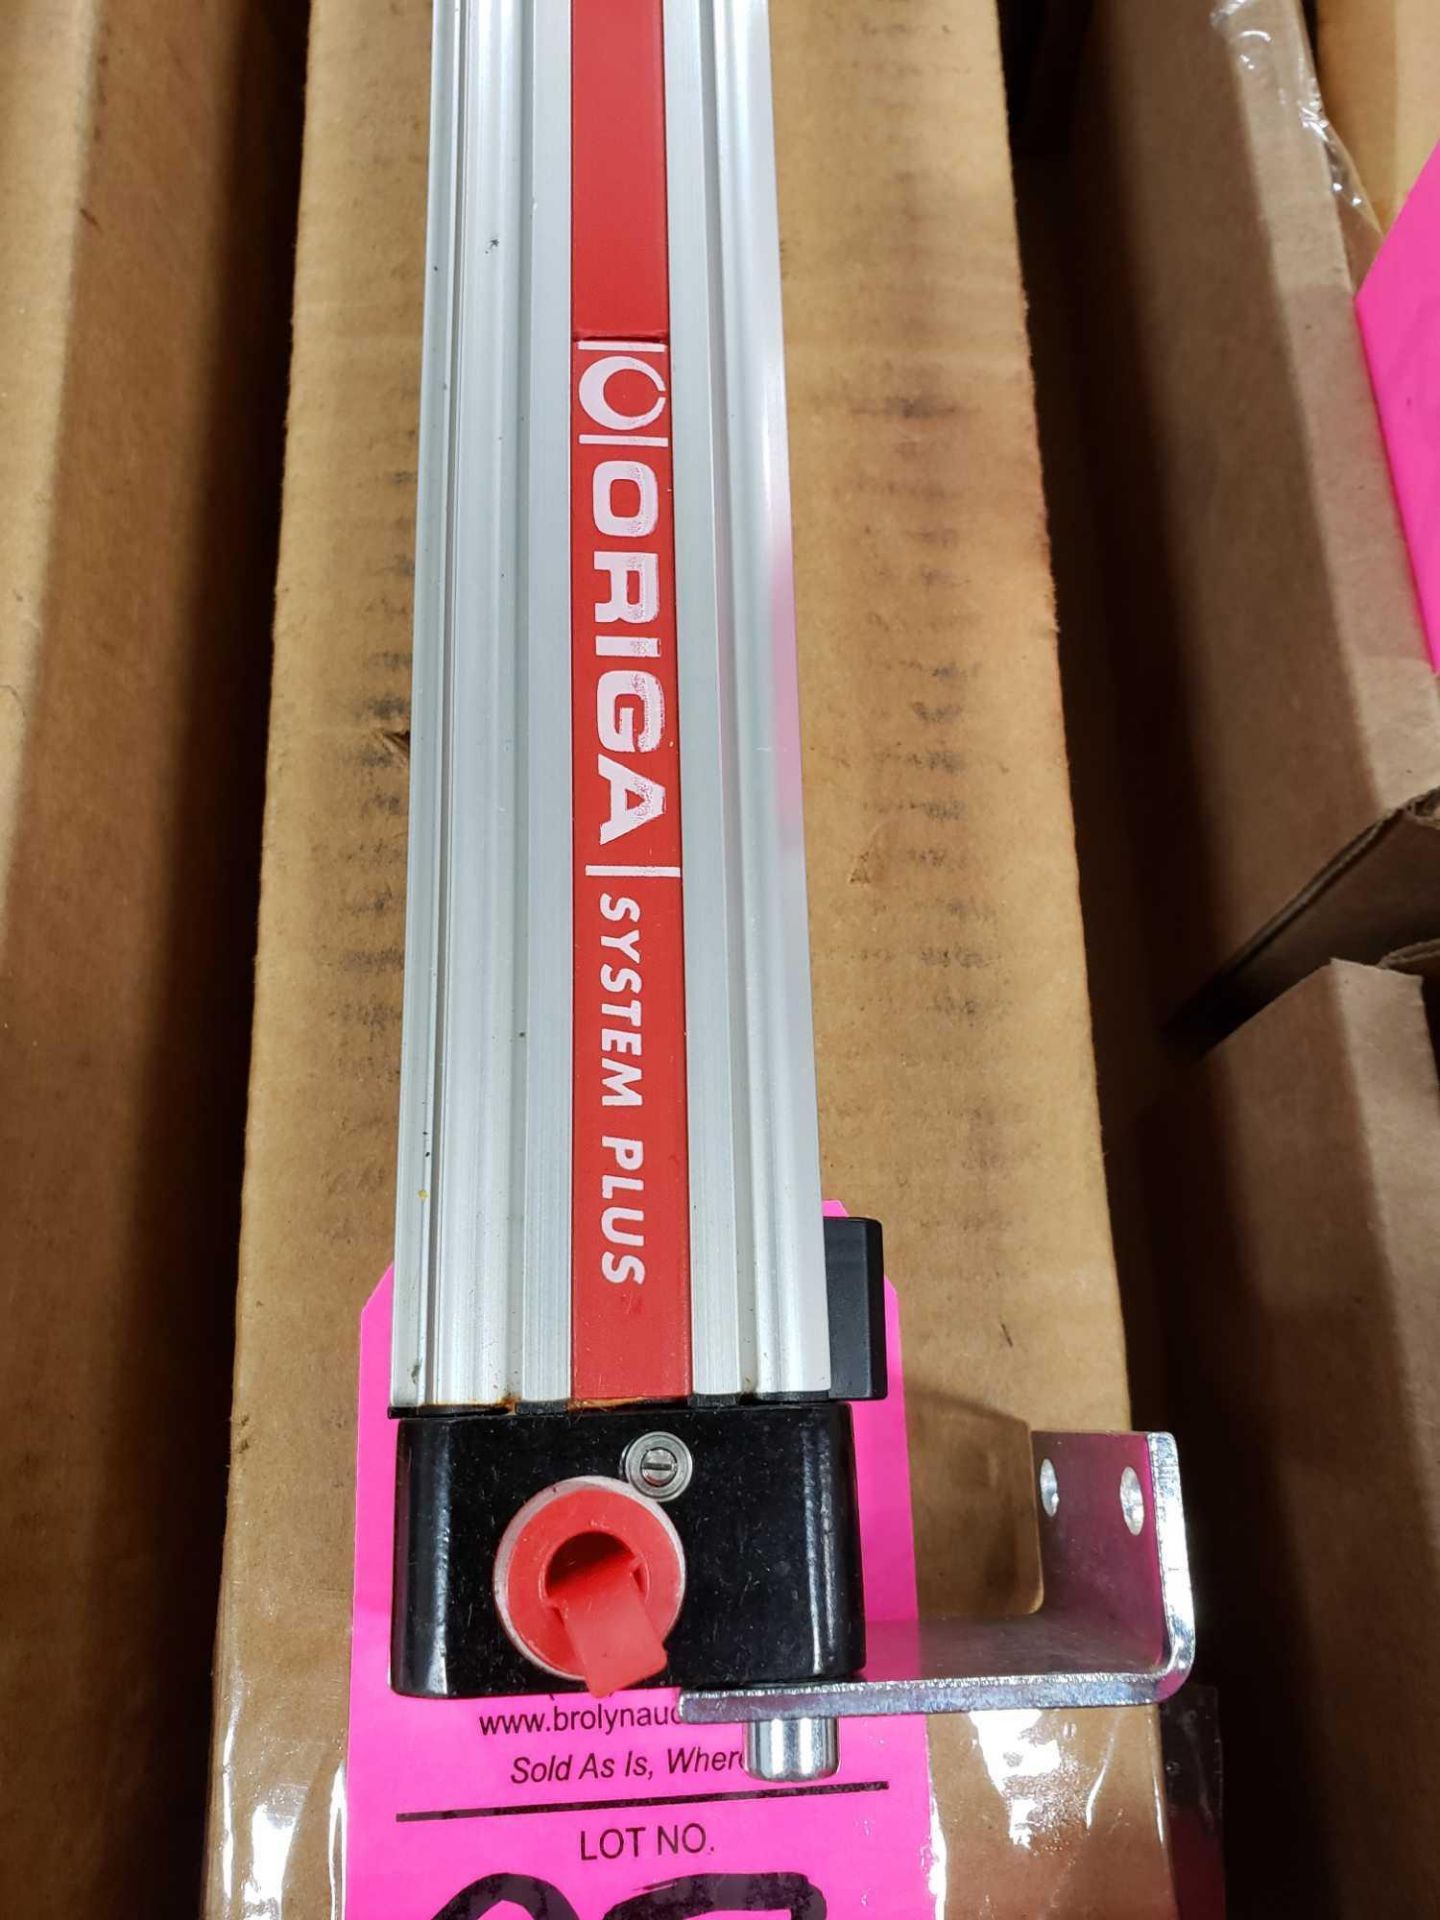 Origa systems plus linear actuator part number P21000003000-00810. New as pictured. - Image 2 of 3